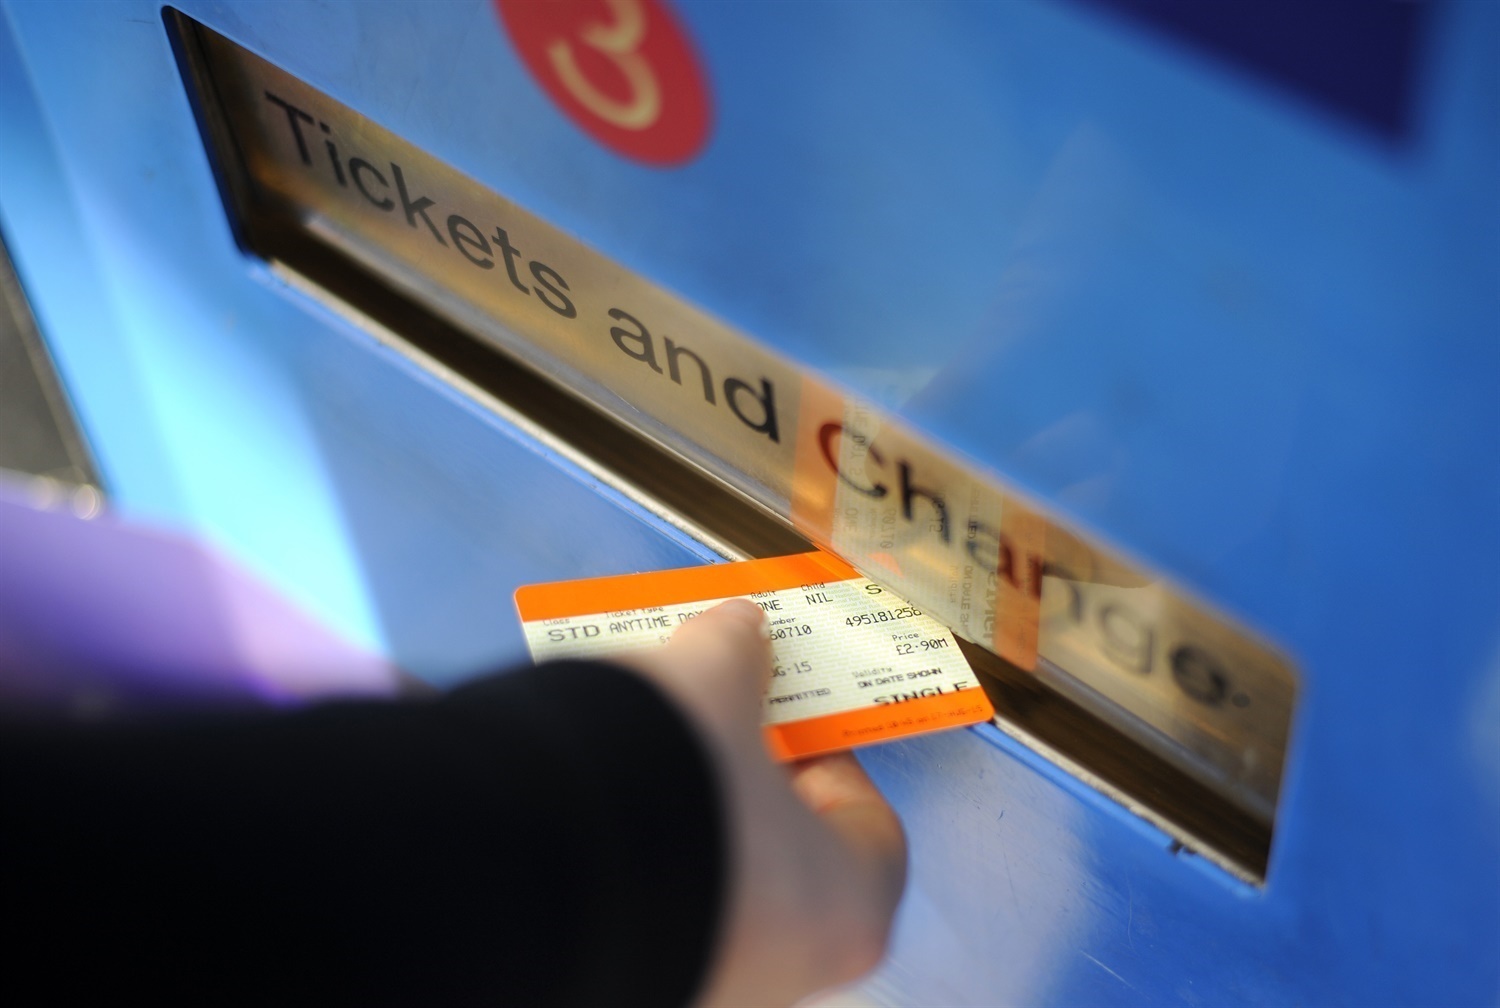 Rail industry launches survey to revolutionise ‘outdated’ fares and ticketing system